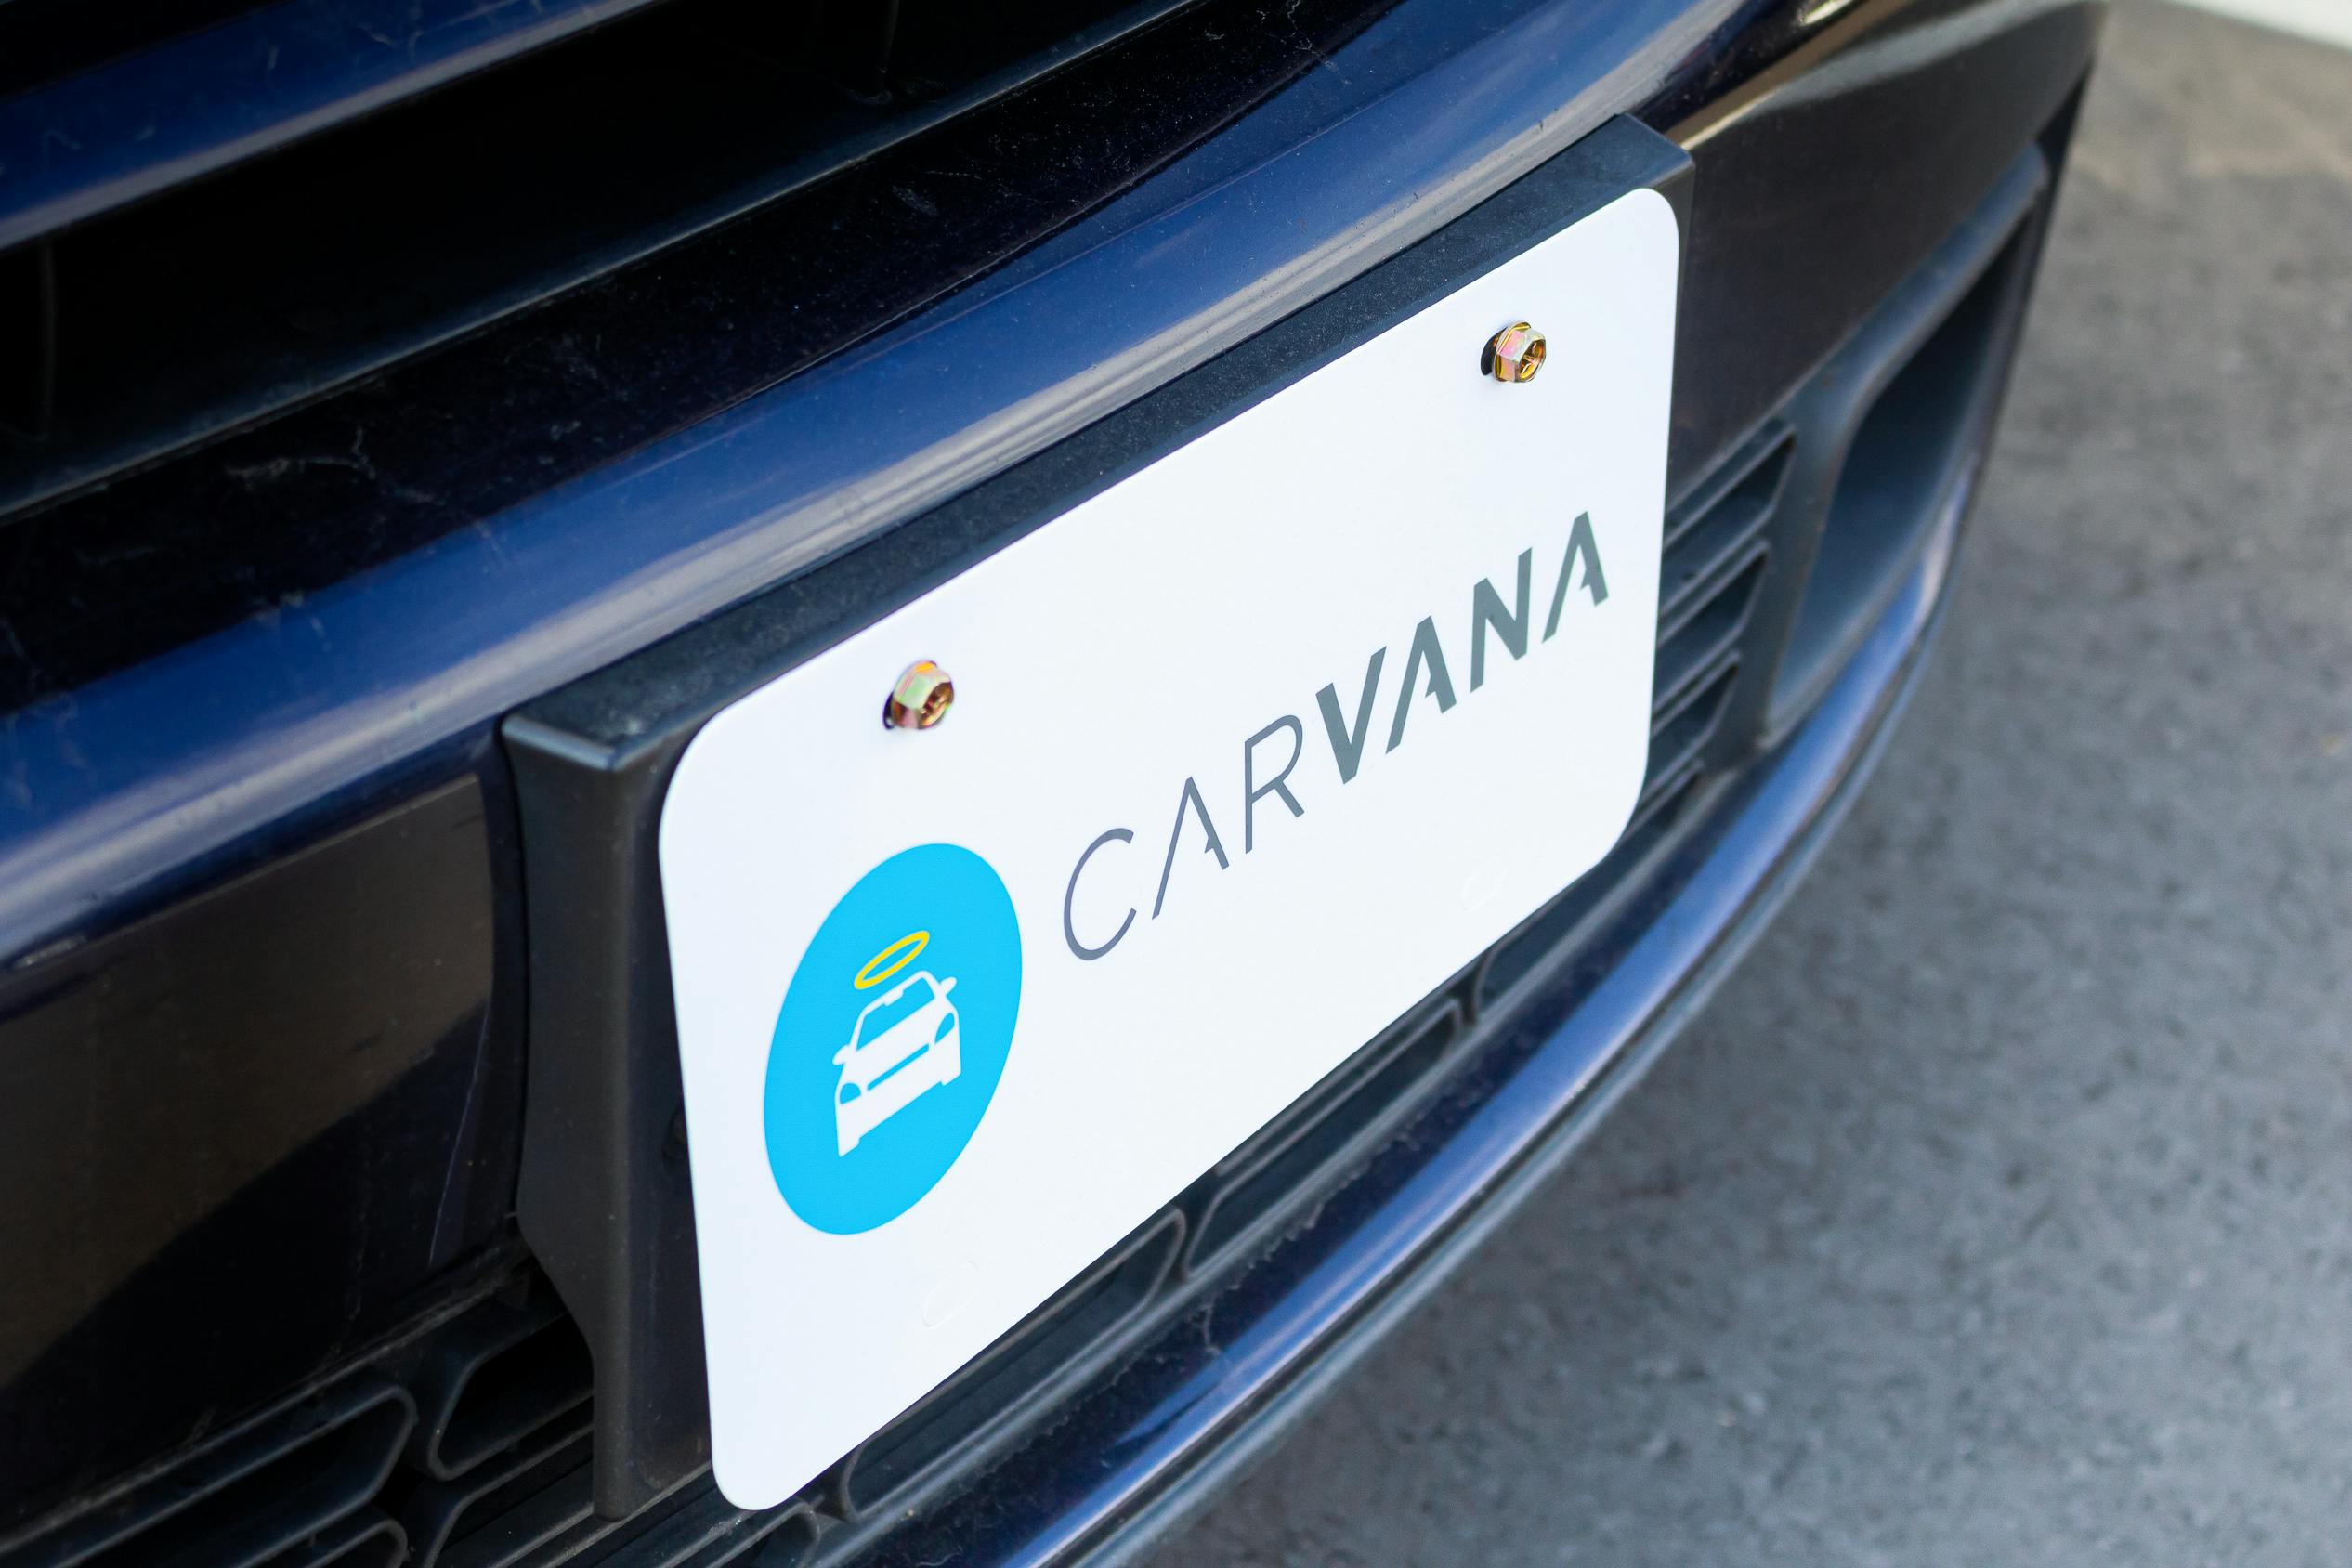 A Carvana branded front license plate on a vehicle